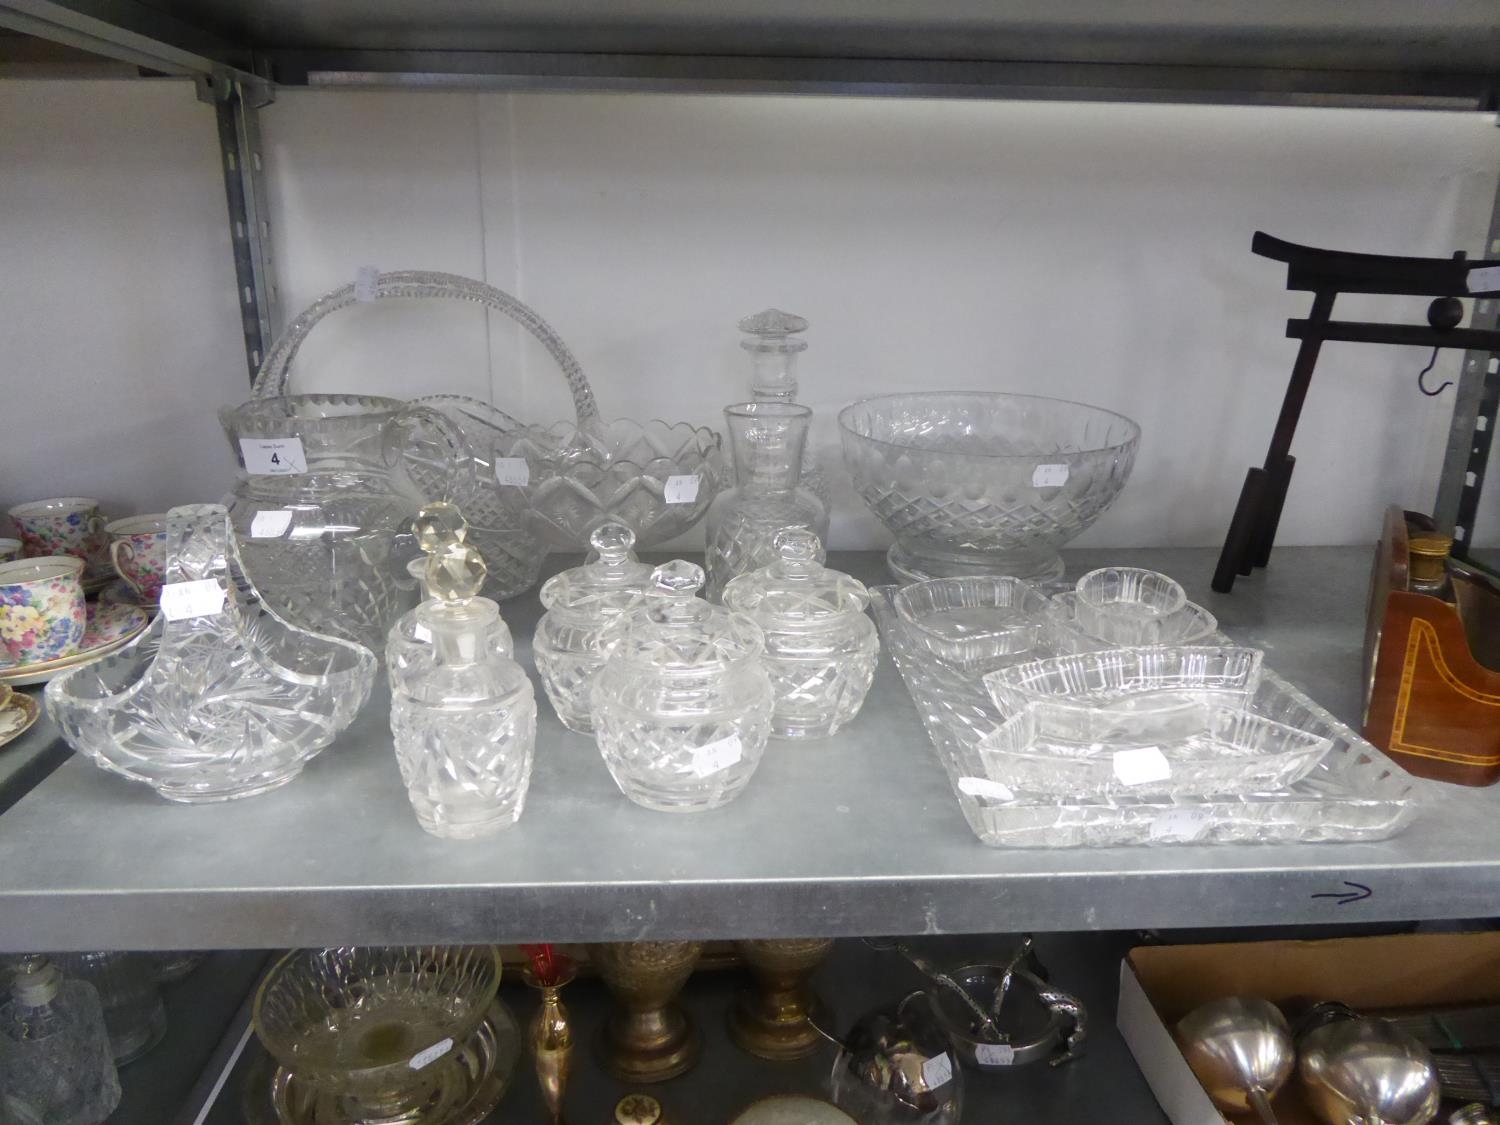 GOOD SELECTION OF LEAD CRYSTAL VASES, CAKE BASKETS, JARS AND COVERS ETC.....